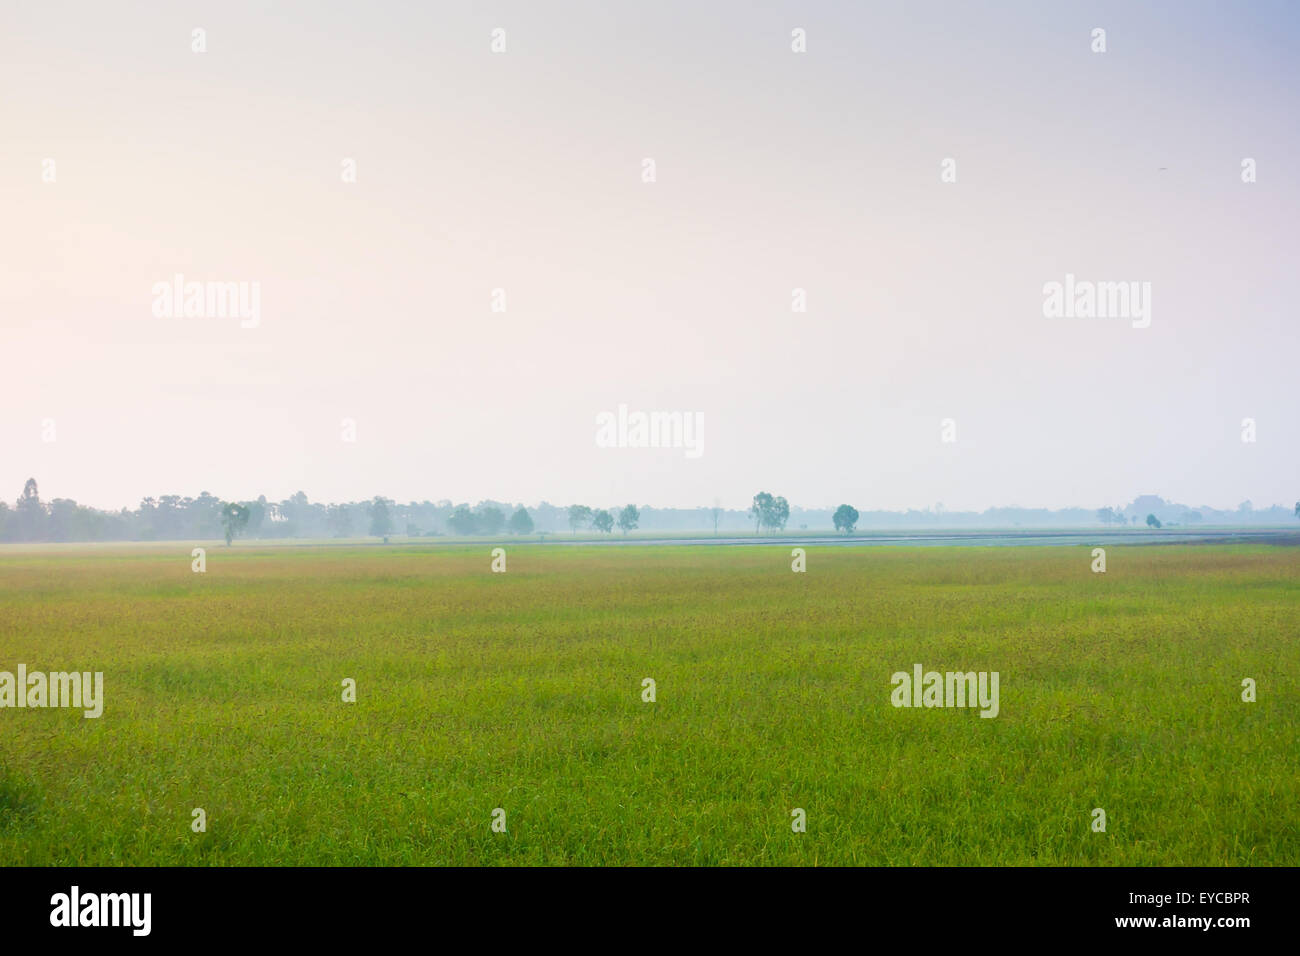 The fog covers the rice field. Rice cultivation for the staple food in Asia. Stock Photo